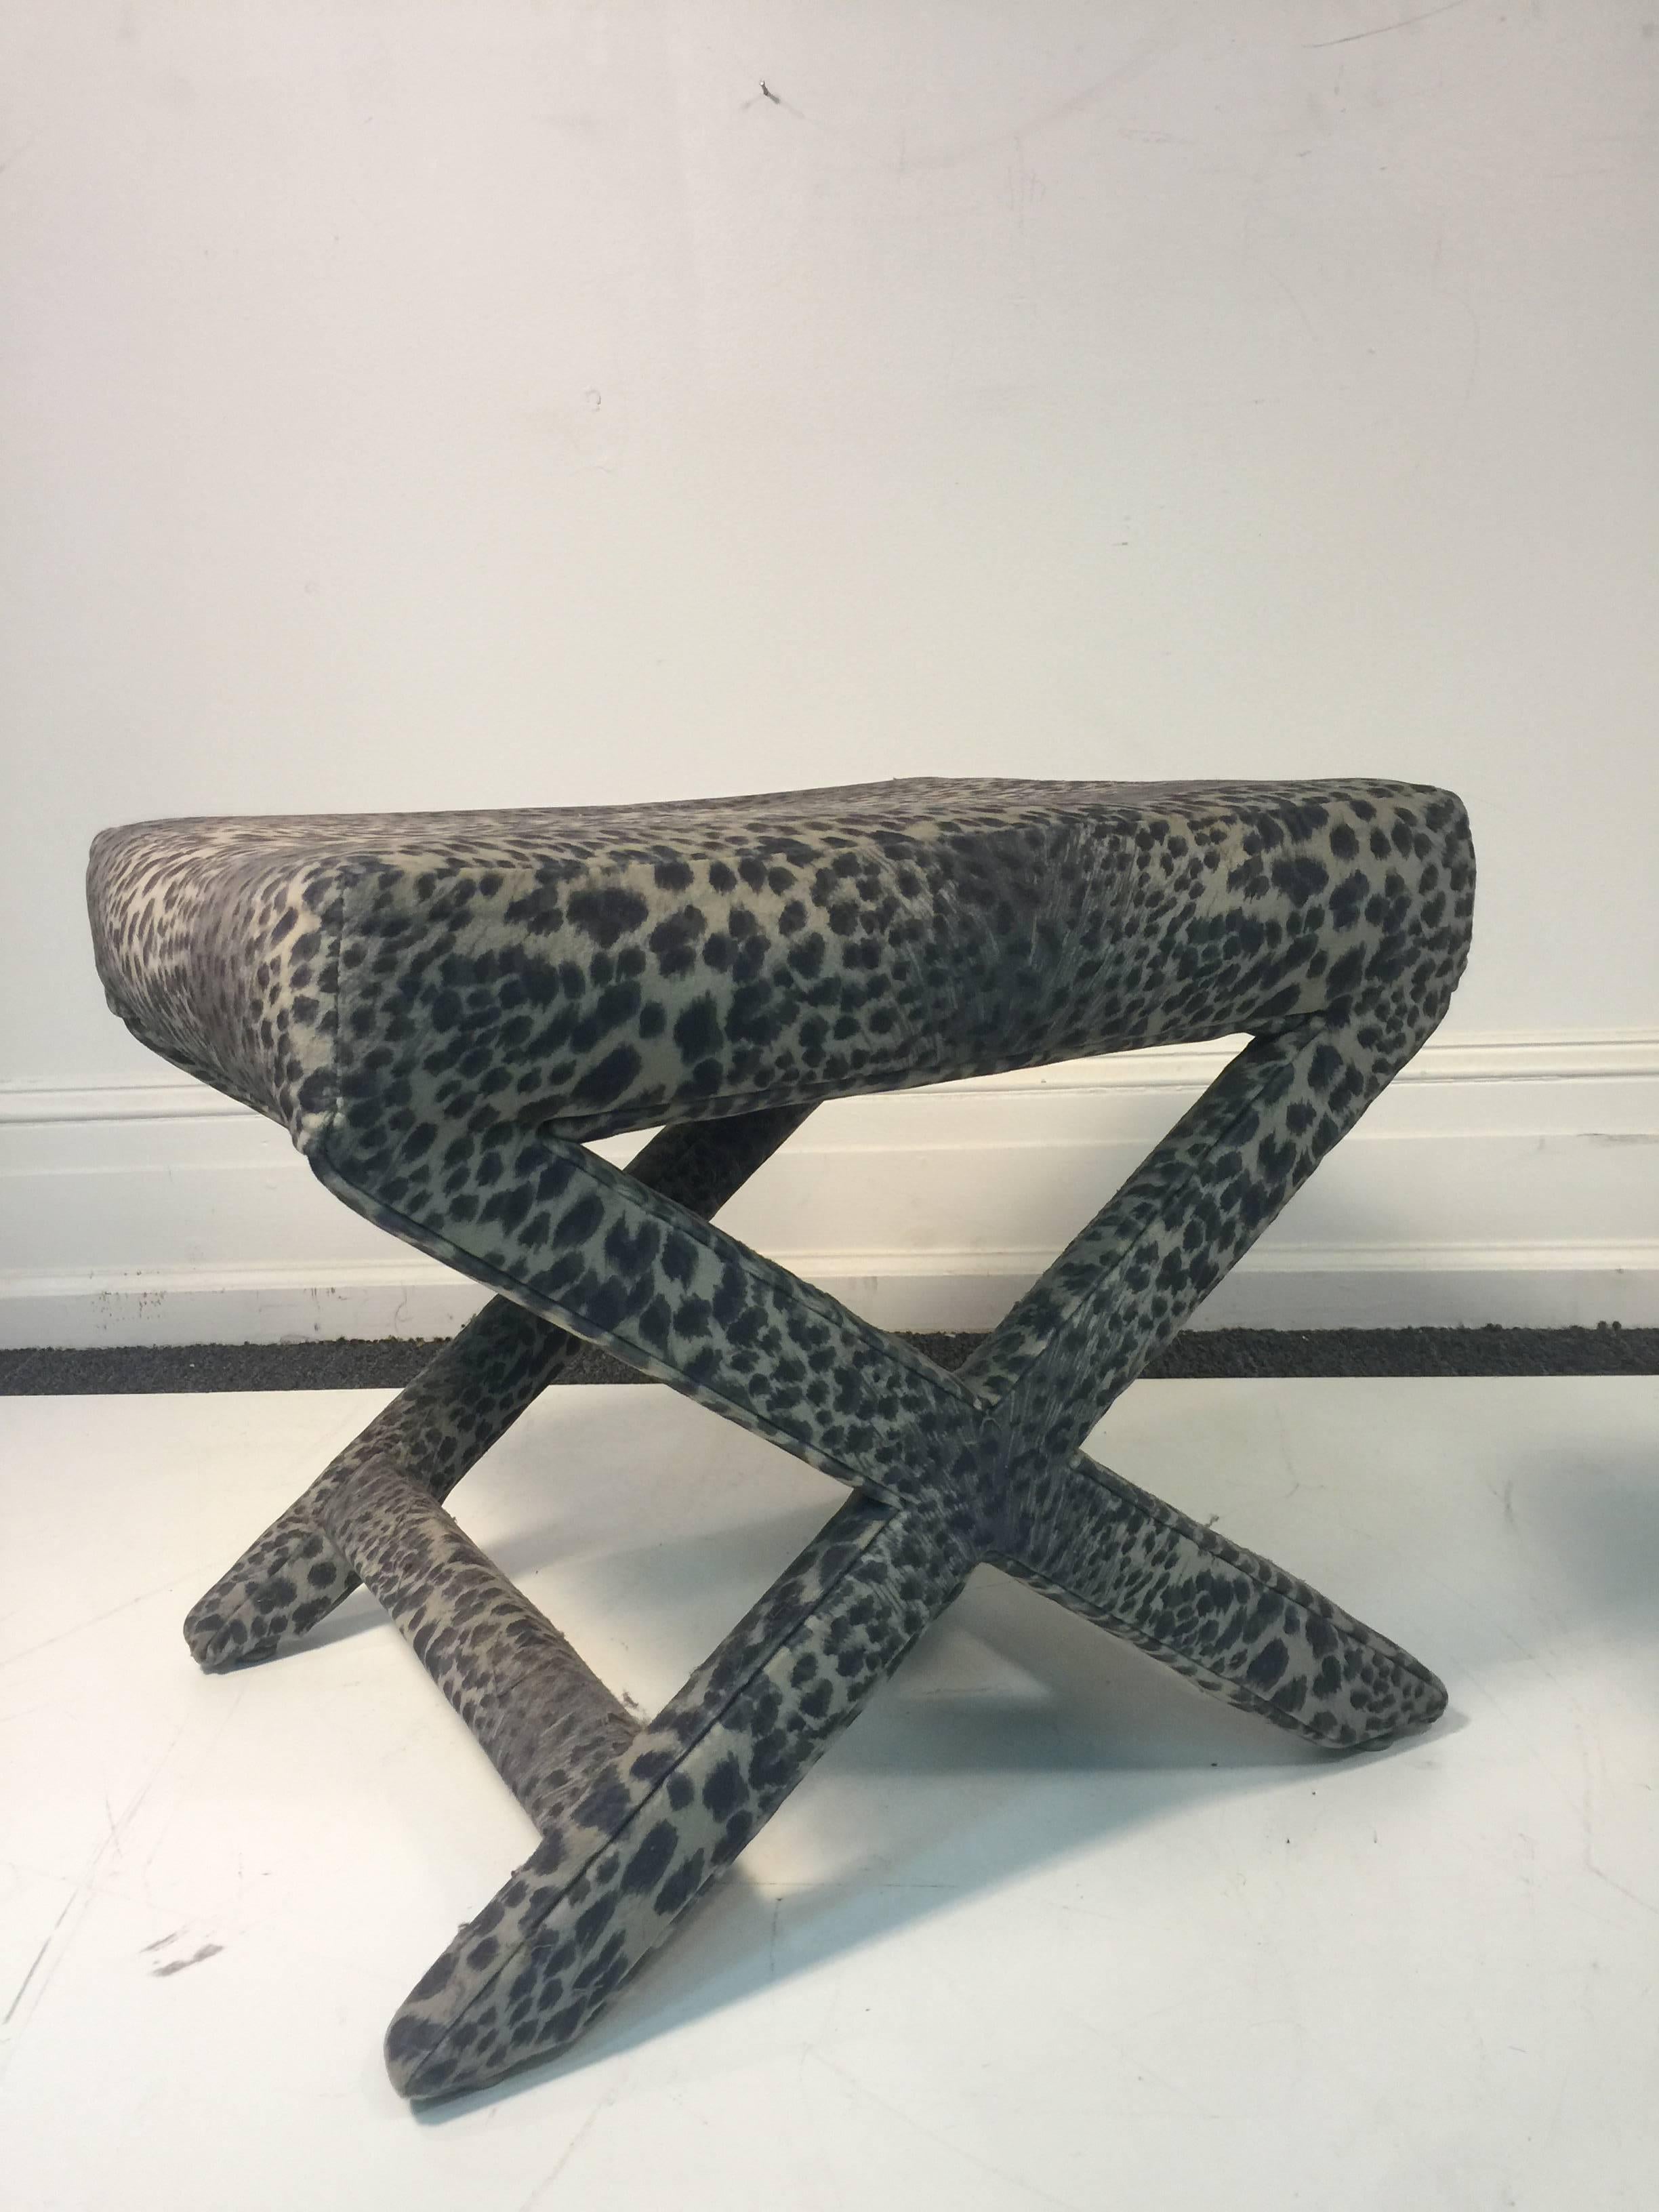 Lovely Pair of Leopard Print X-Base Stools or Benches In Good Condition For Sale In Mount Penn, PA